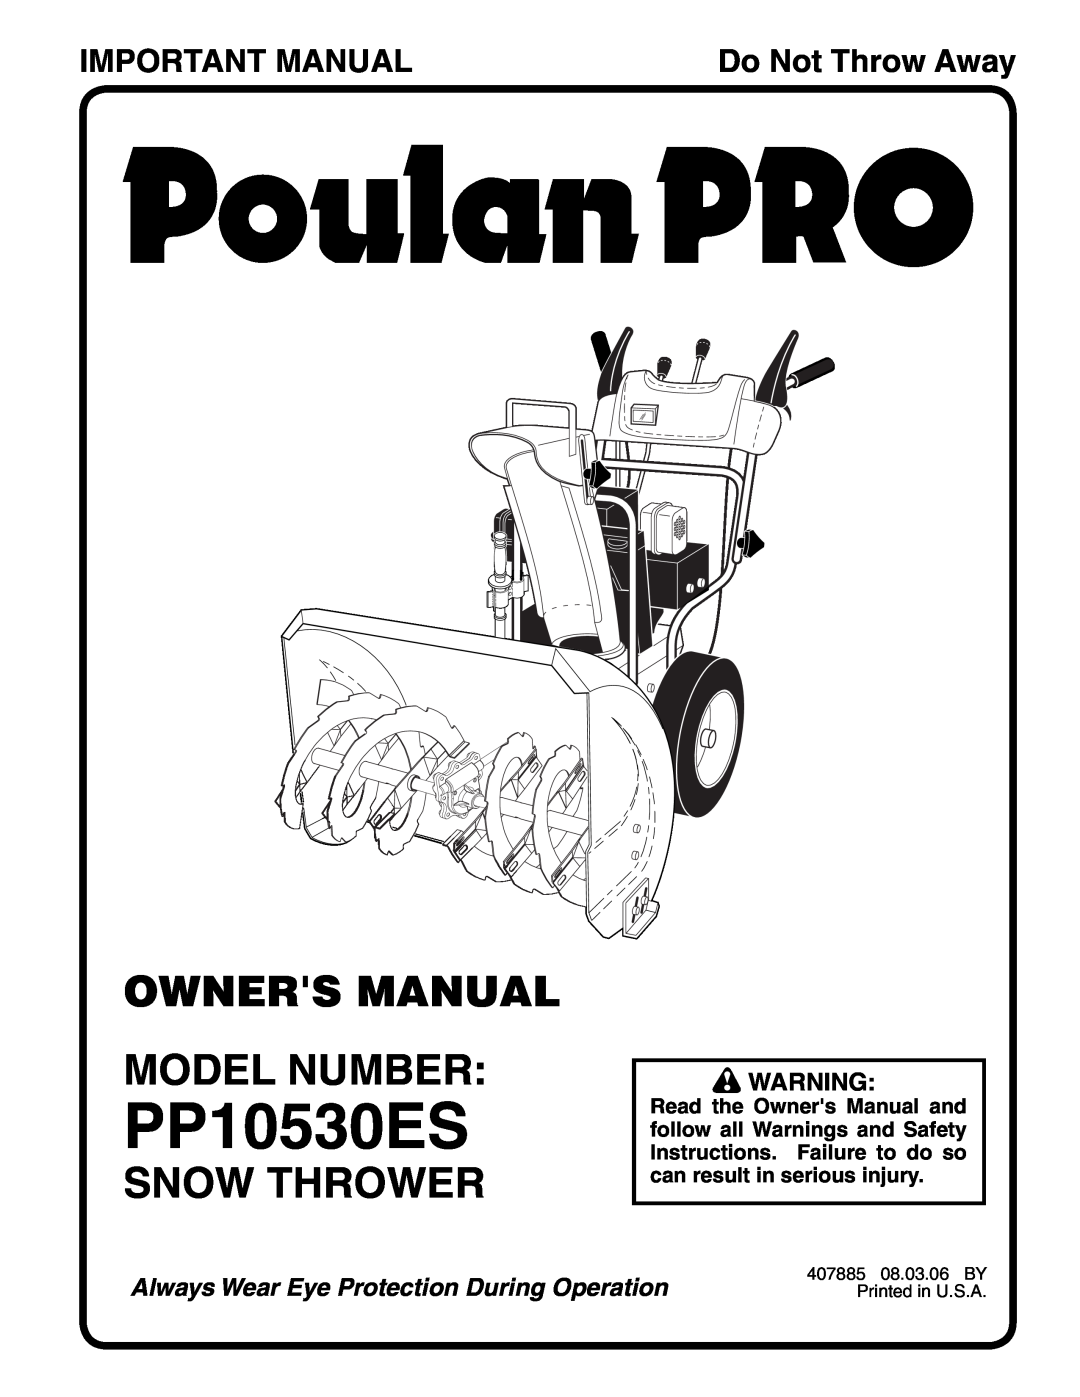 Poulan PP10530ES owner manual Snow Thrower, Important Manual, Do Not Throw Away 